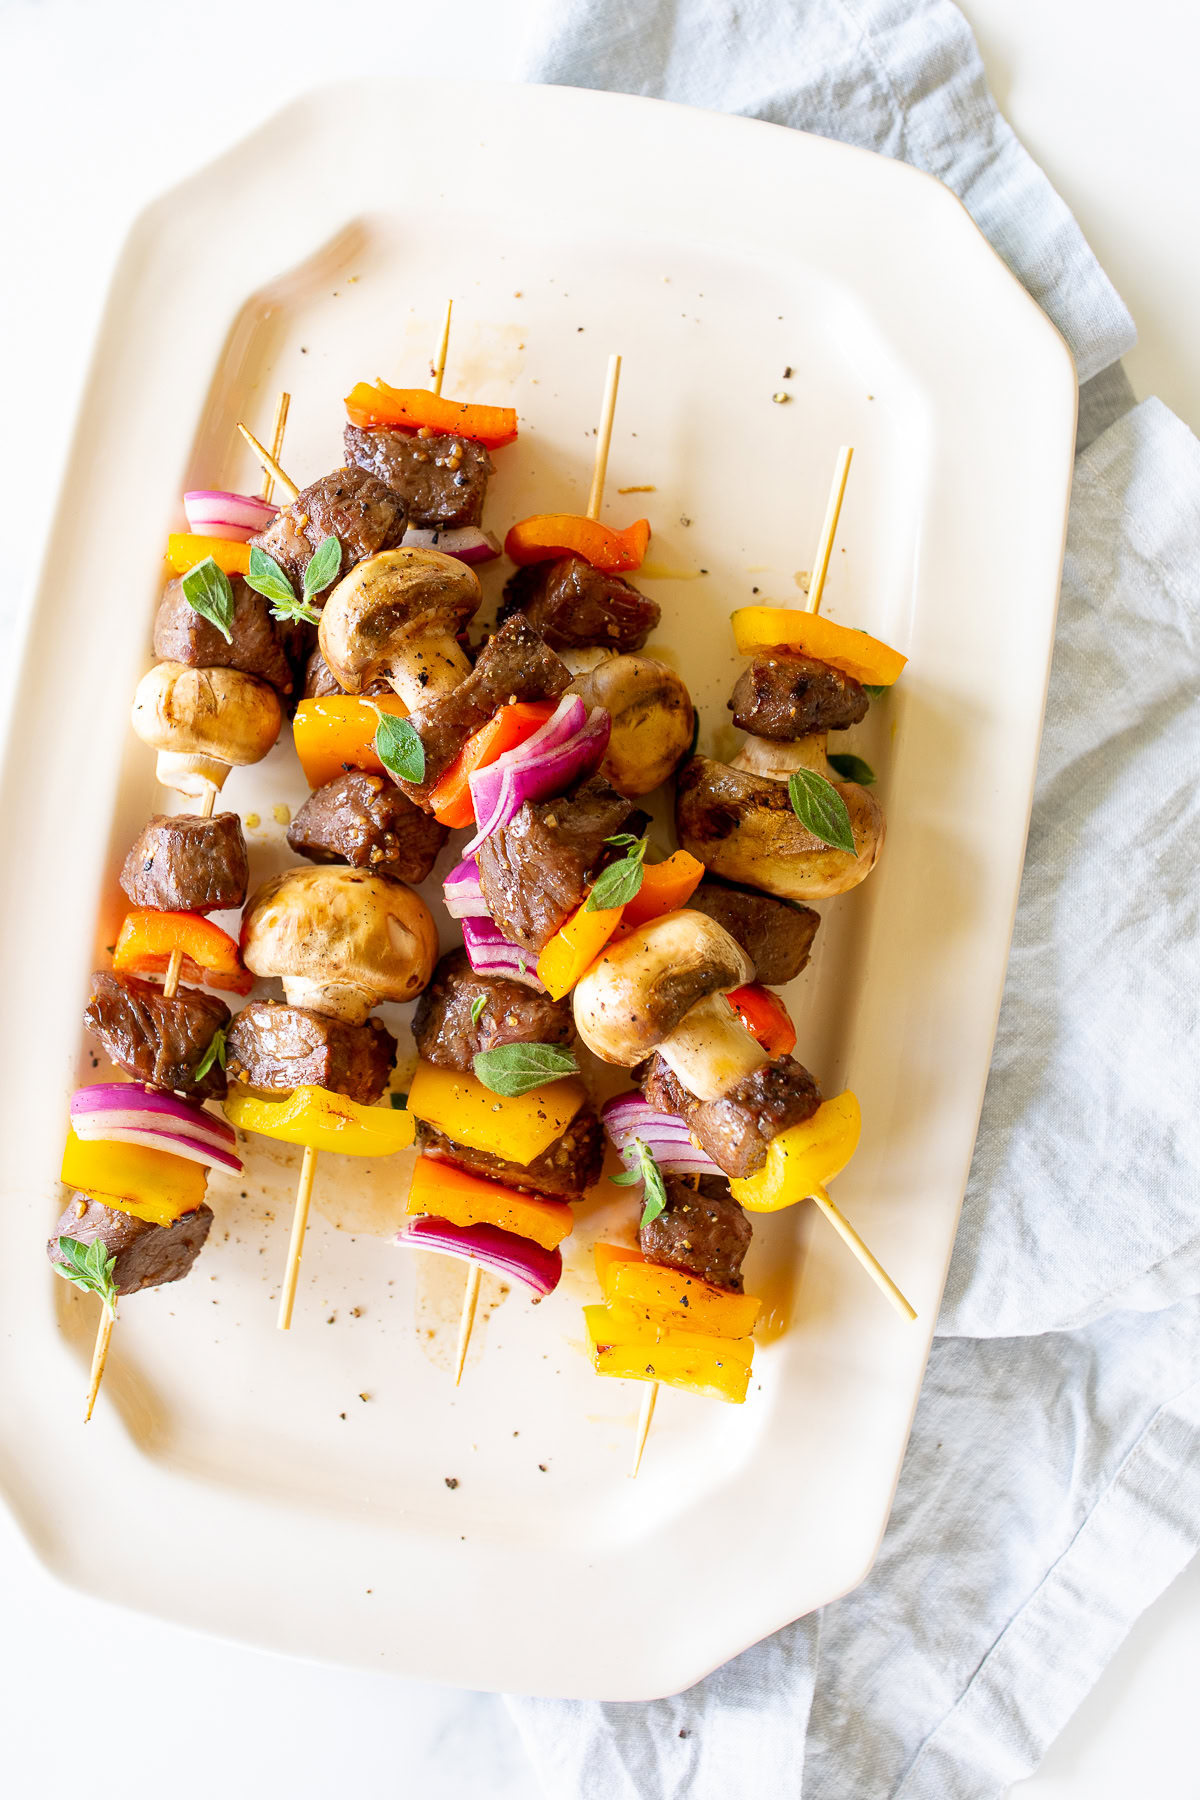 A white platter with skewers of steak kabobs, mushrooms, red onions, and bell peppers, garnished with fresh herbs, resting on a light blue cloth napkin.